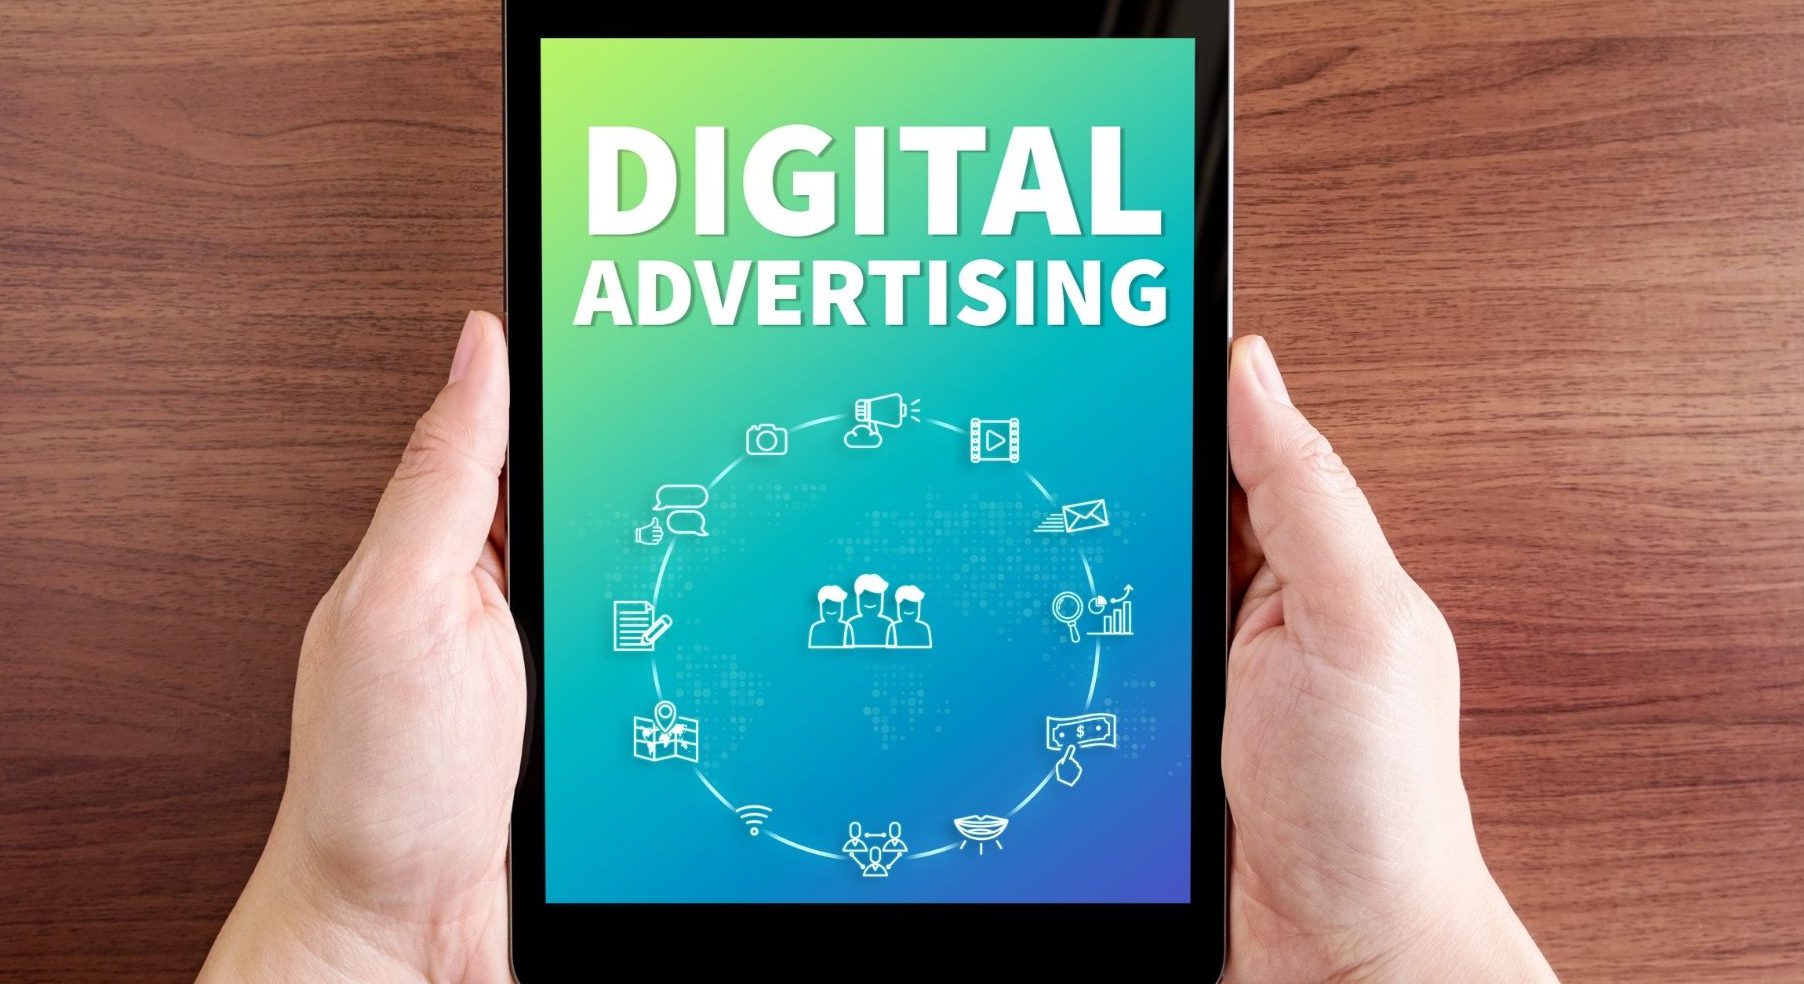 Take up Global Digital Advertising Market Opportunities with clear Industry Data – Includes Digital Advertising Industry